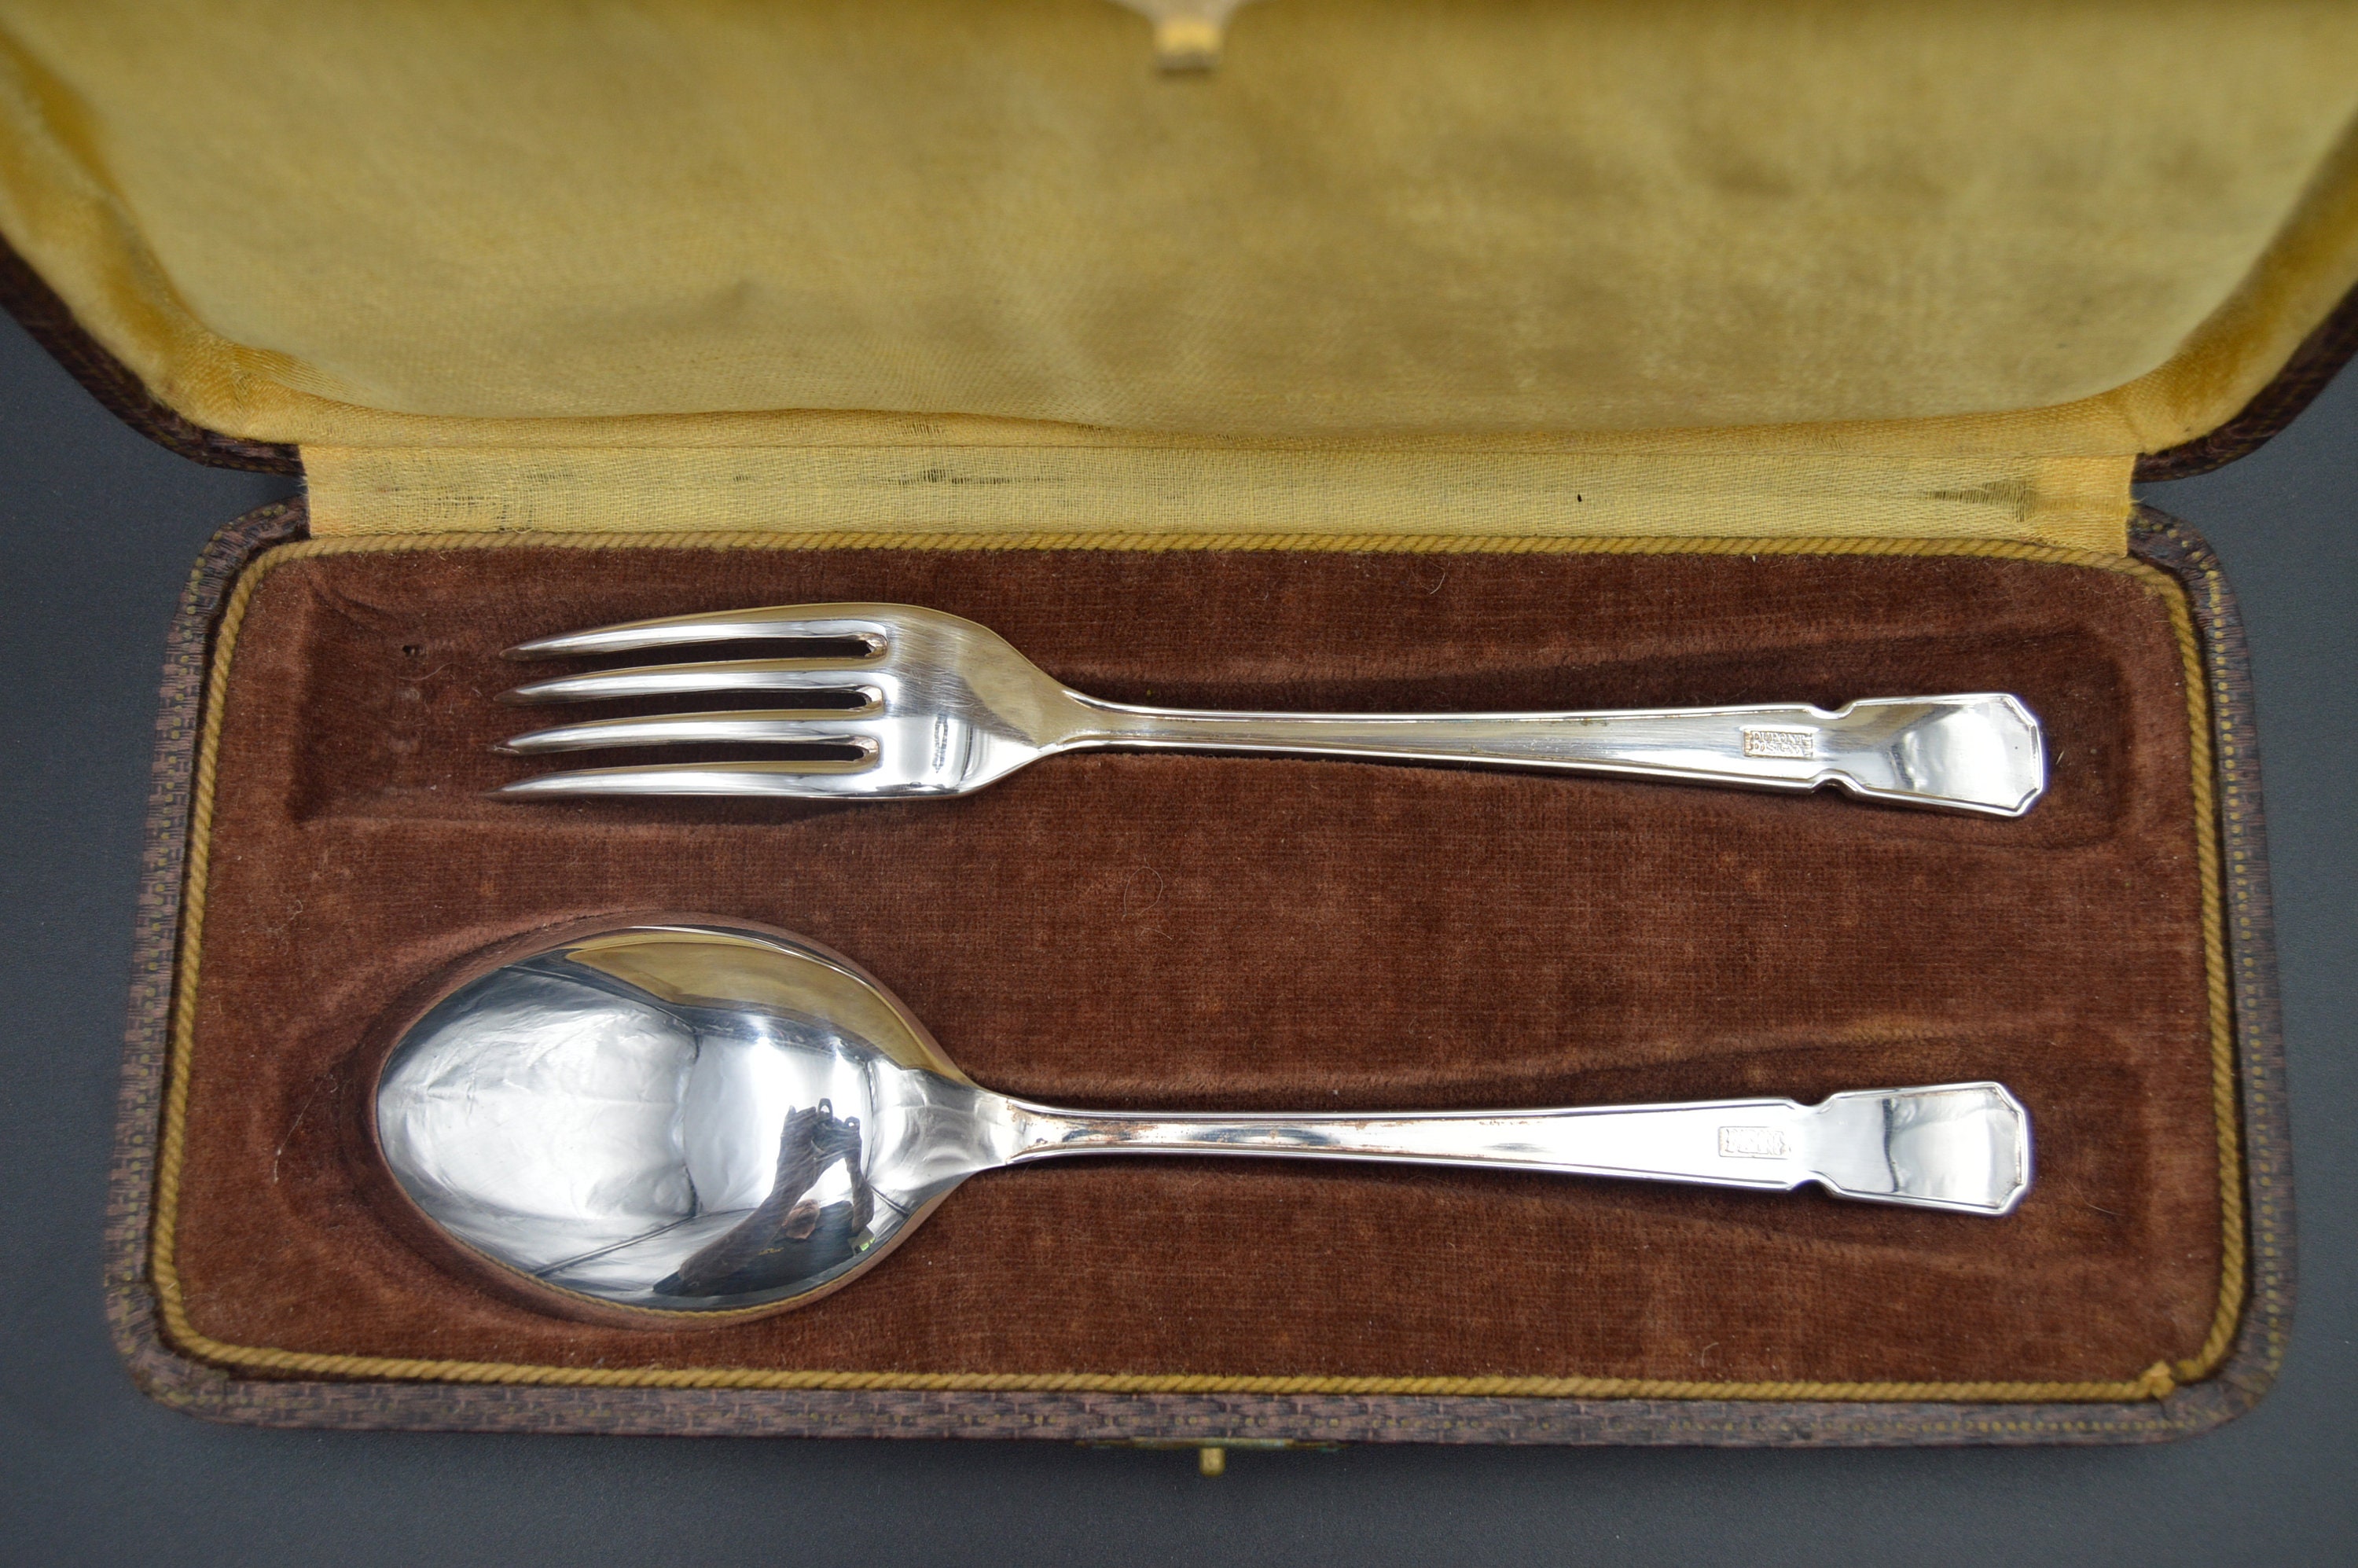 Serving Fork and Spoon Dupon D'Isigny Silver Plated 'Metaille Blanc' Boxed  Fork and Spoon Marked Design Good Condition Box Worn